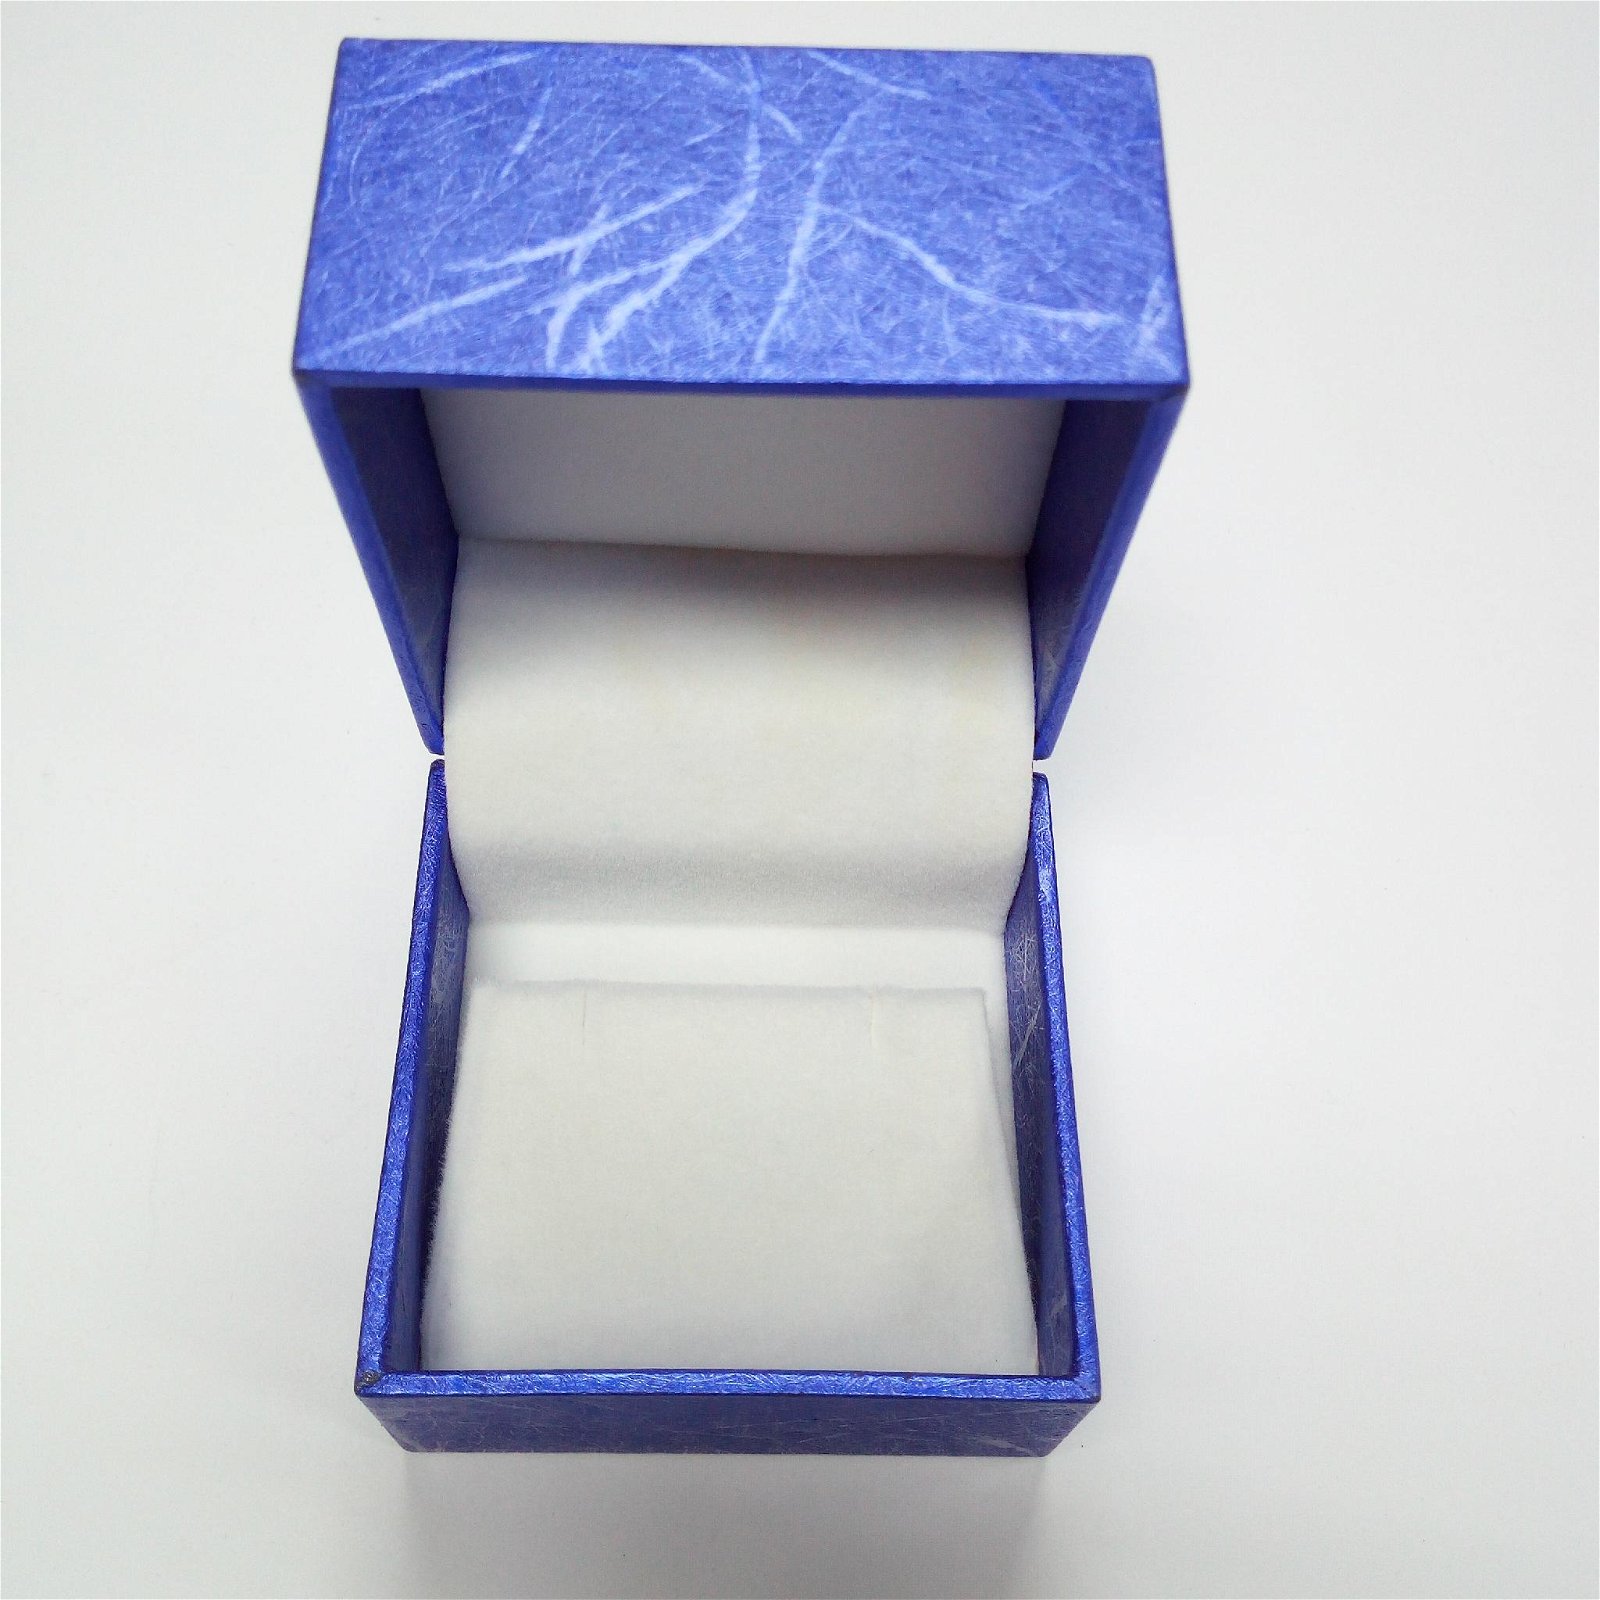 Jewelry ring leather box